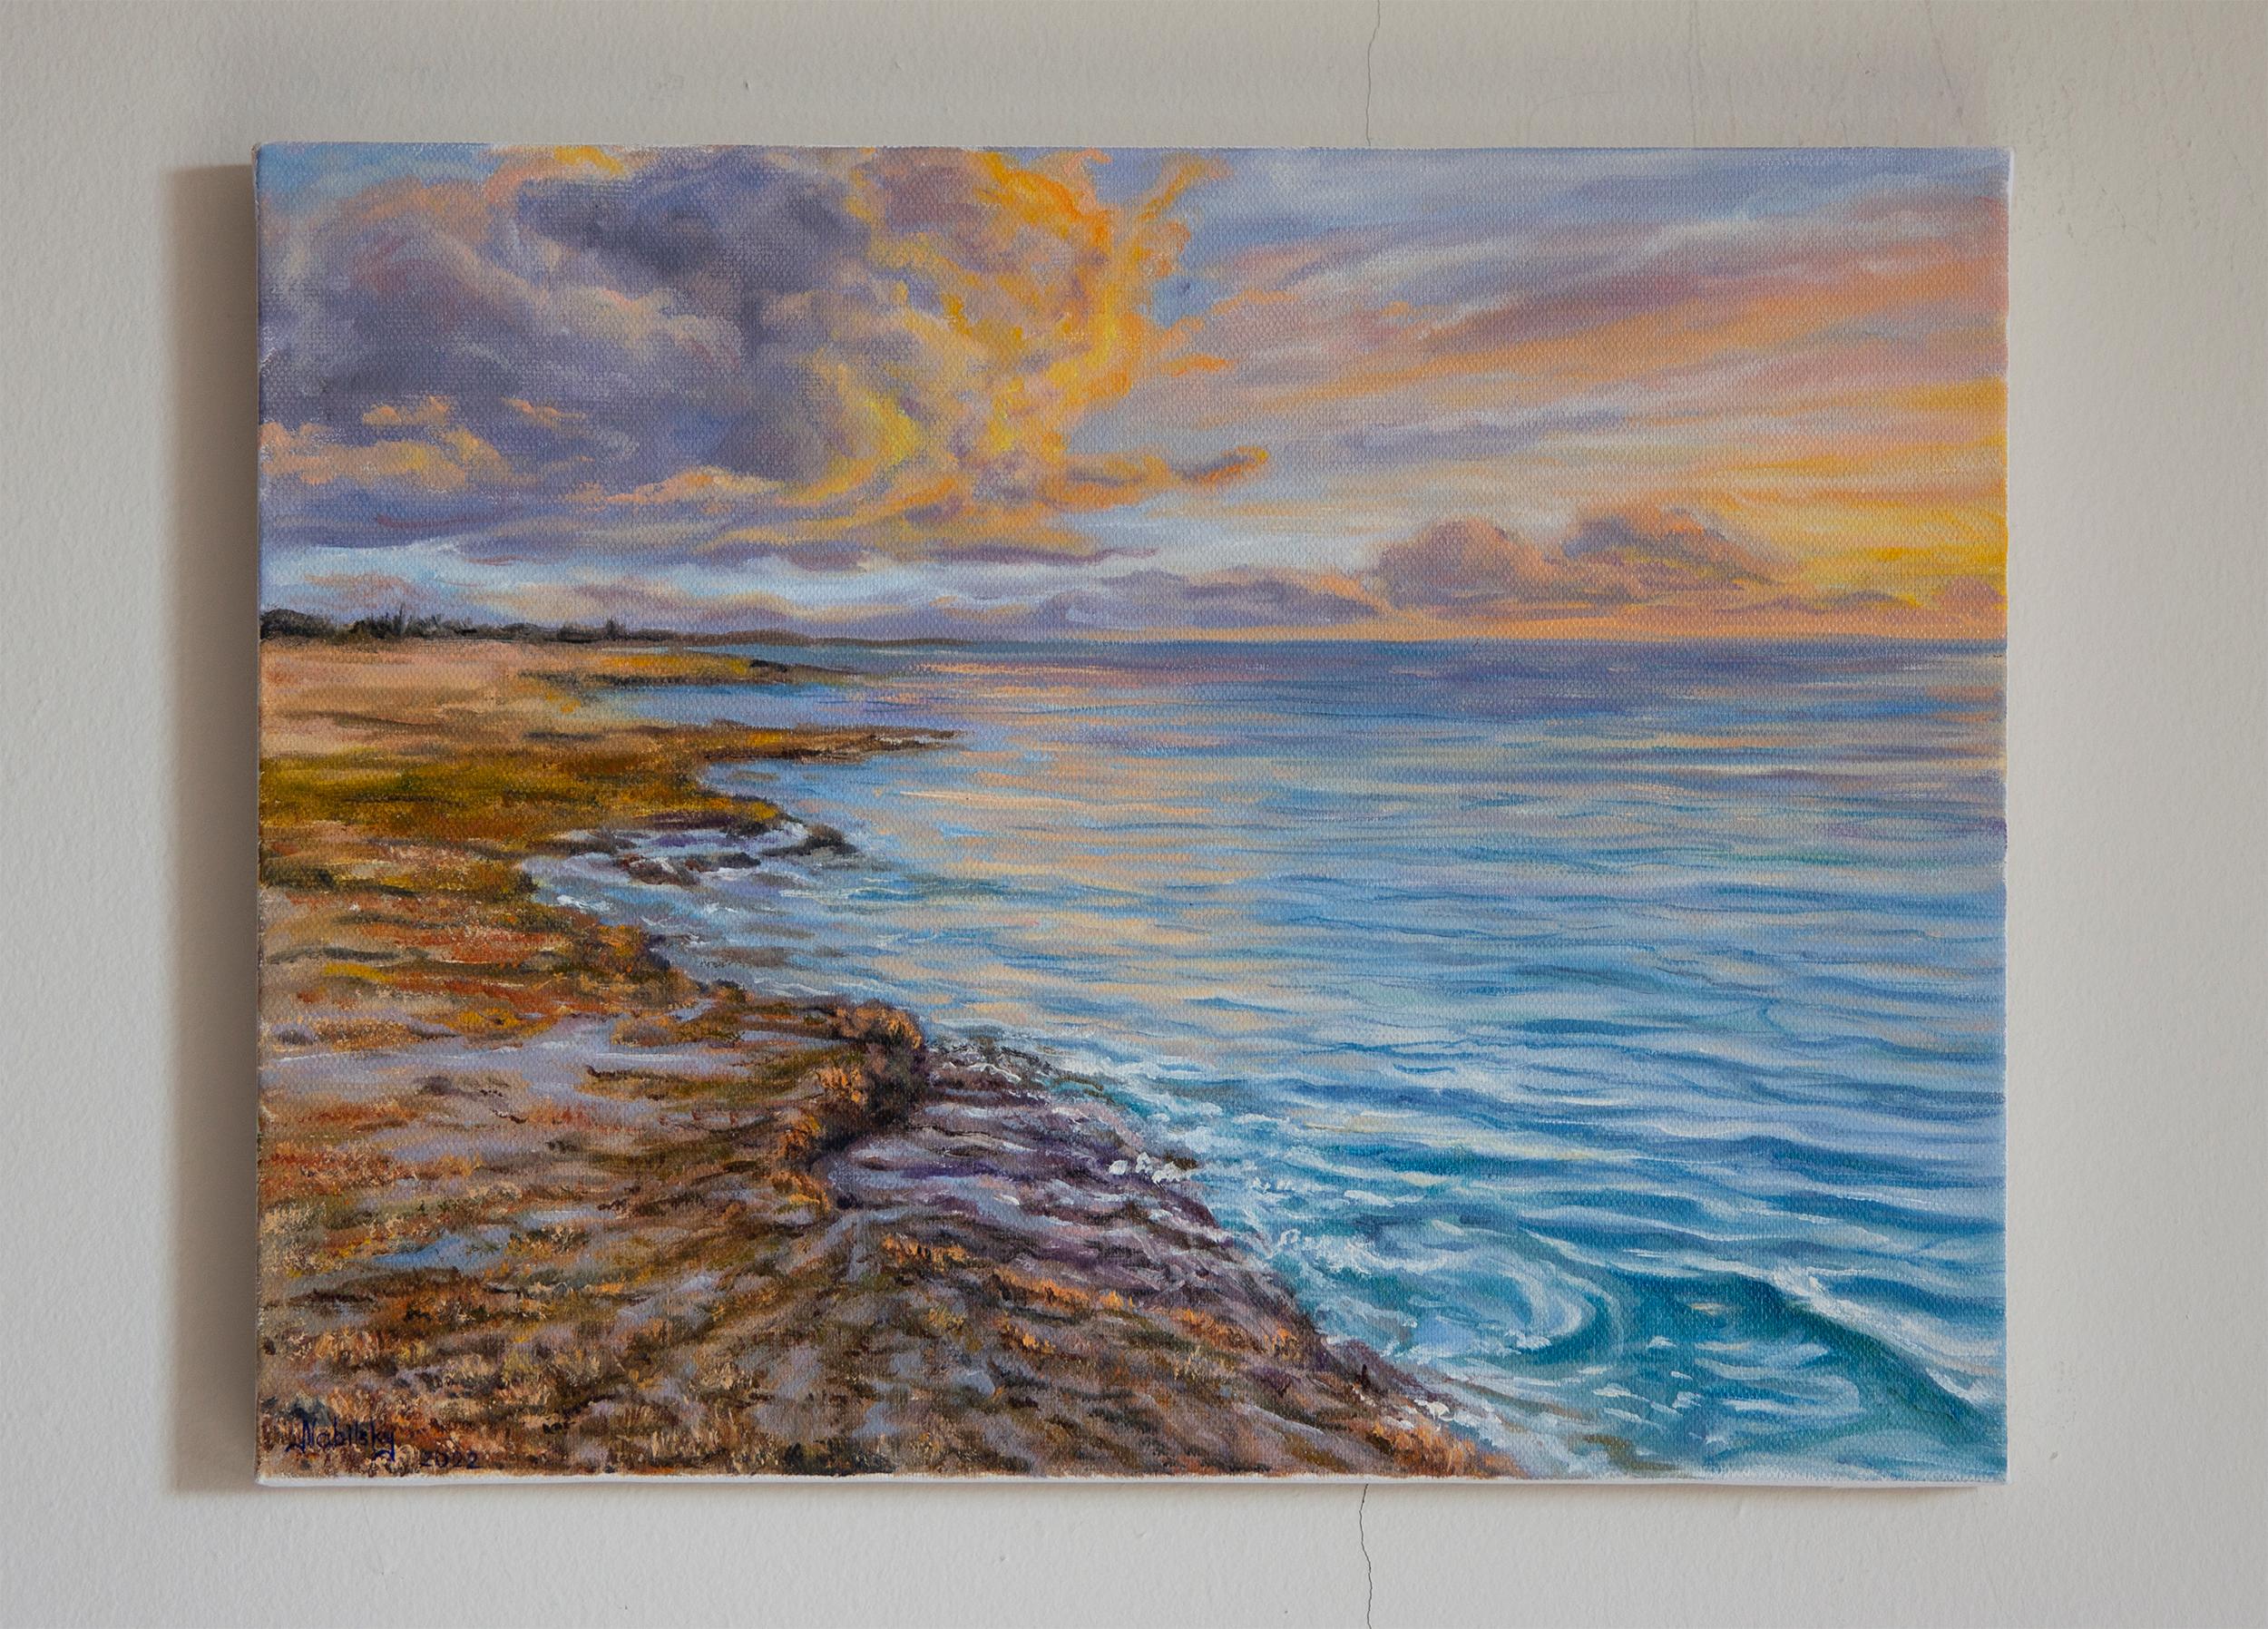 <p>Artist Comments<br />The streams of light cast a warm and inviting atmosphere on the shore. Each sunset on the ocean tells a unique story. The harmony between the ever-changing clouds, quickly shifting hues in the sky, and fluctuating waves of